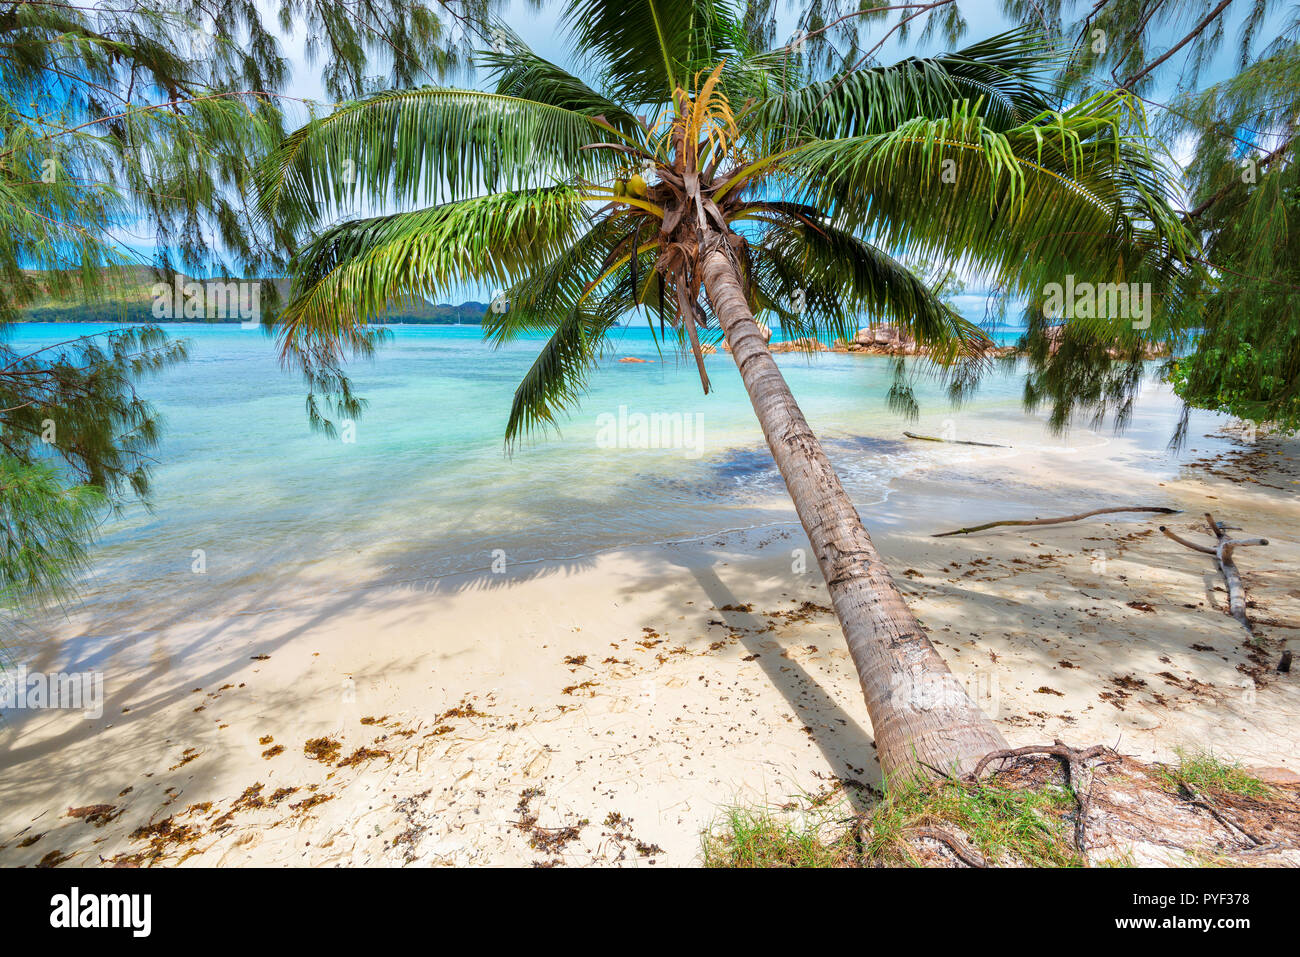 Palm tree on tropical island and turquoise sea. Stock Photo